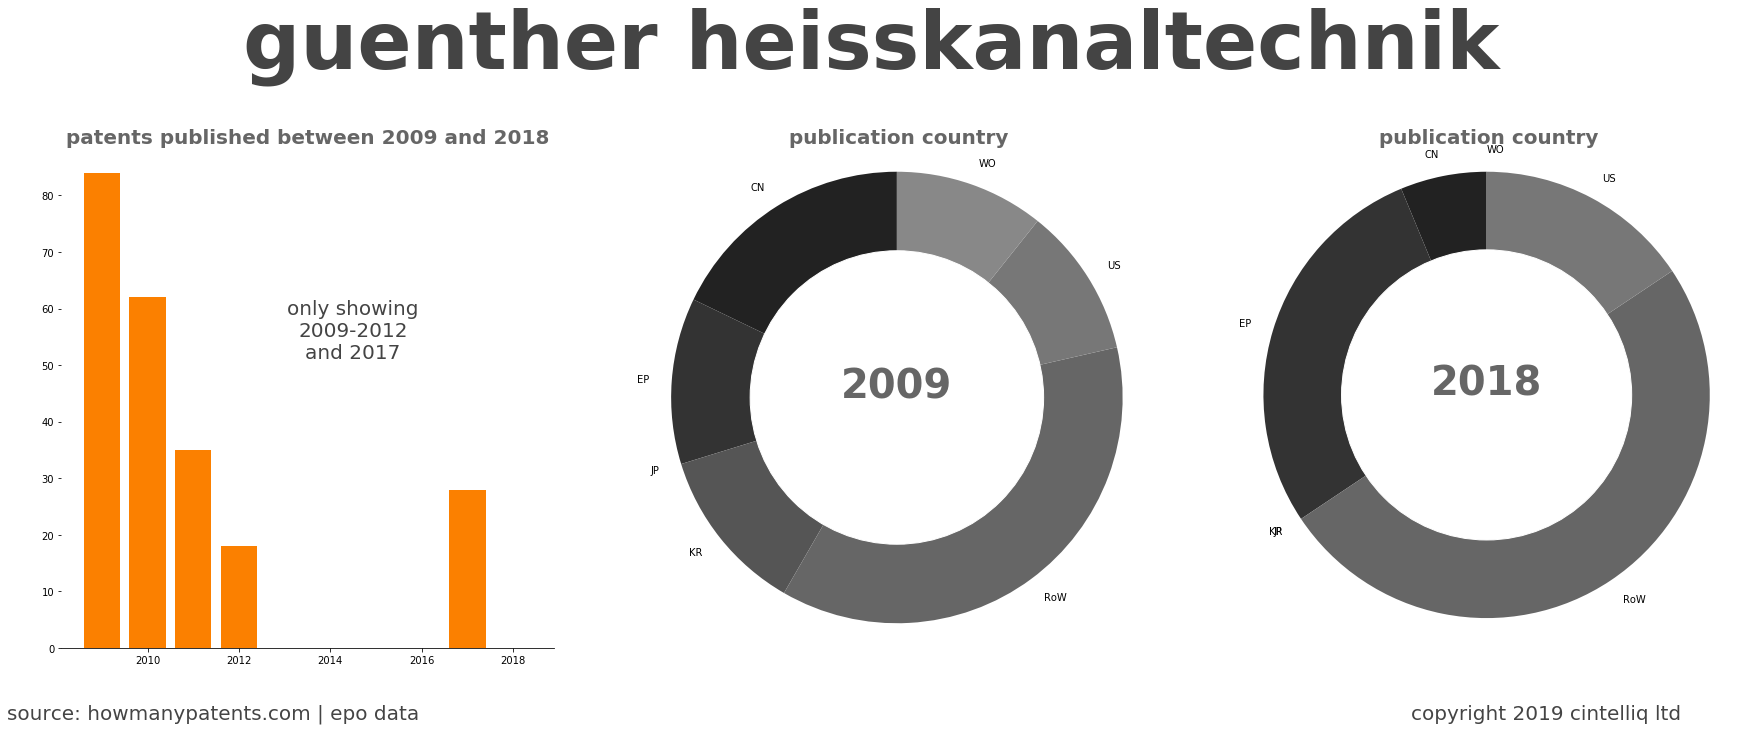 summary of patents for Guenther Heisskanaltechnik